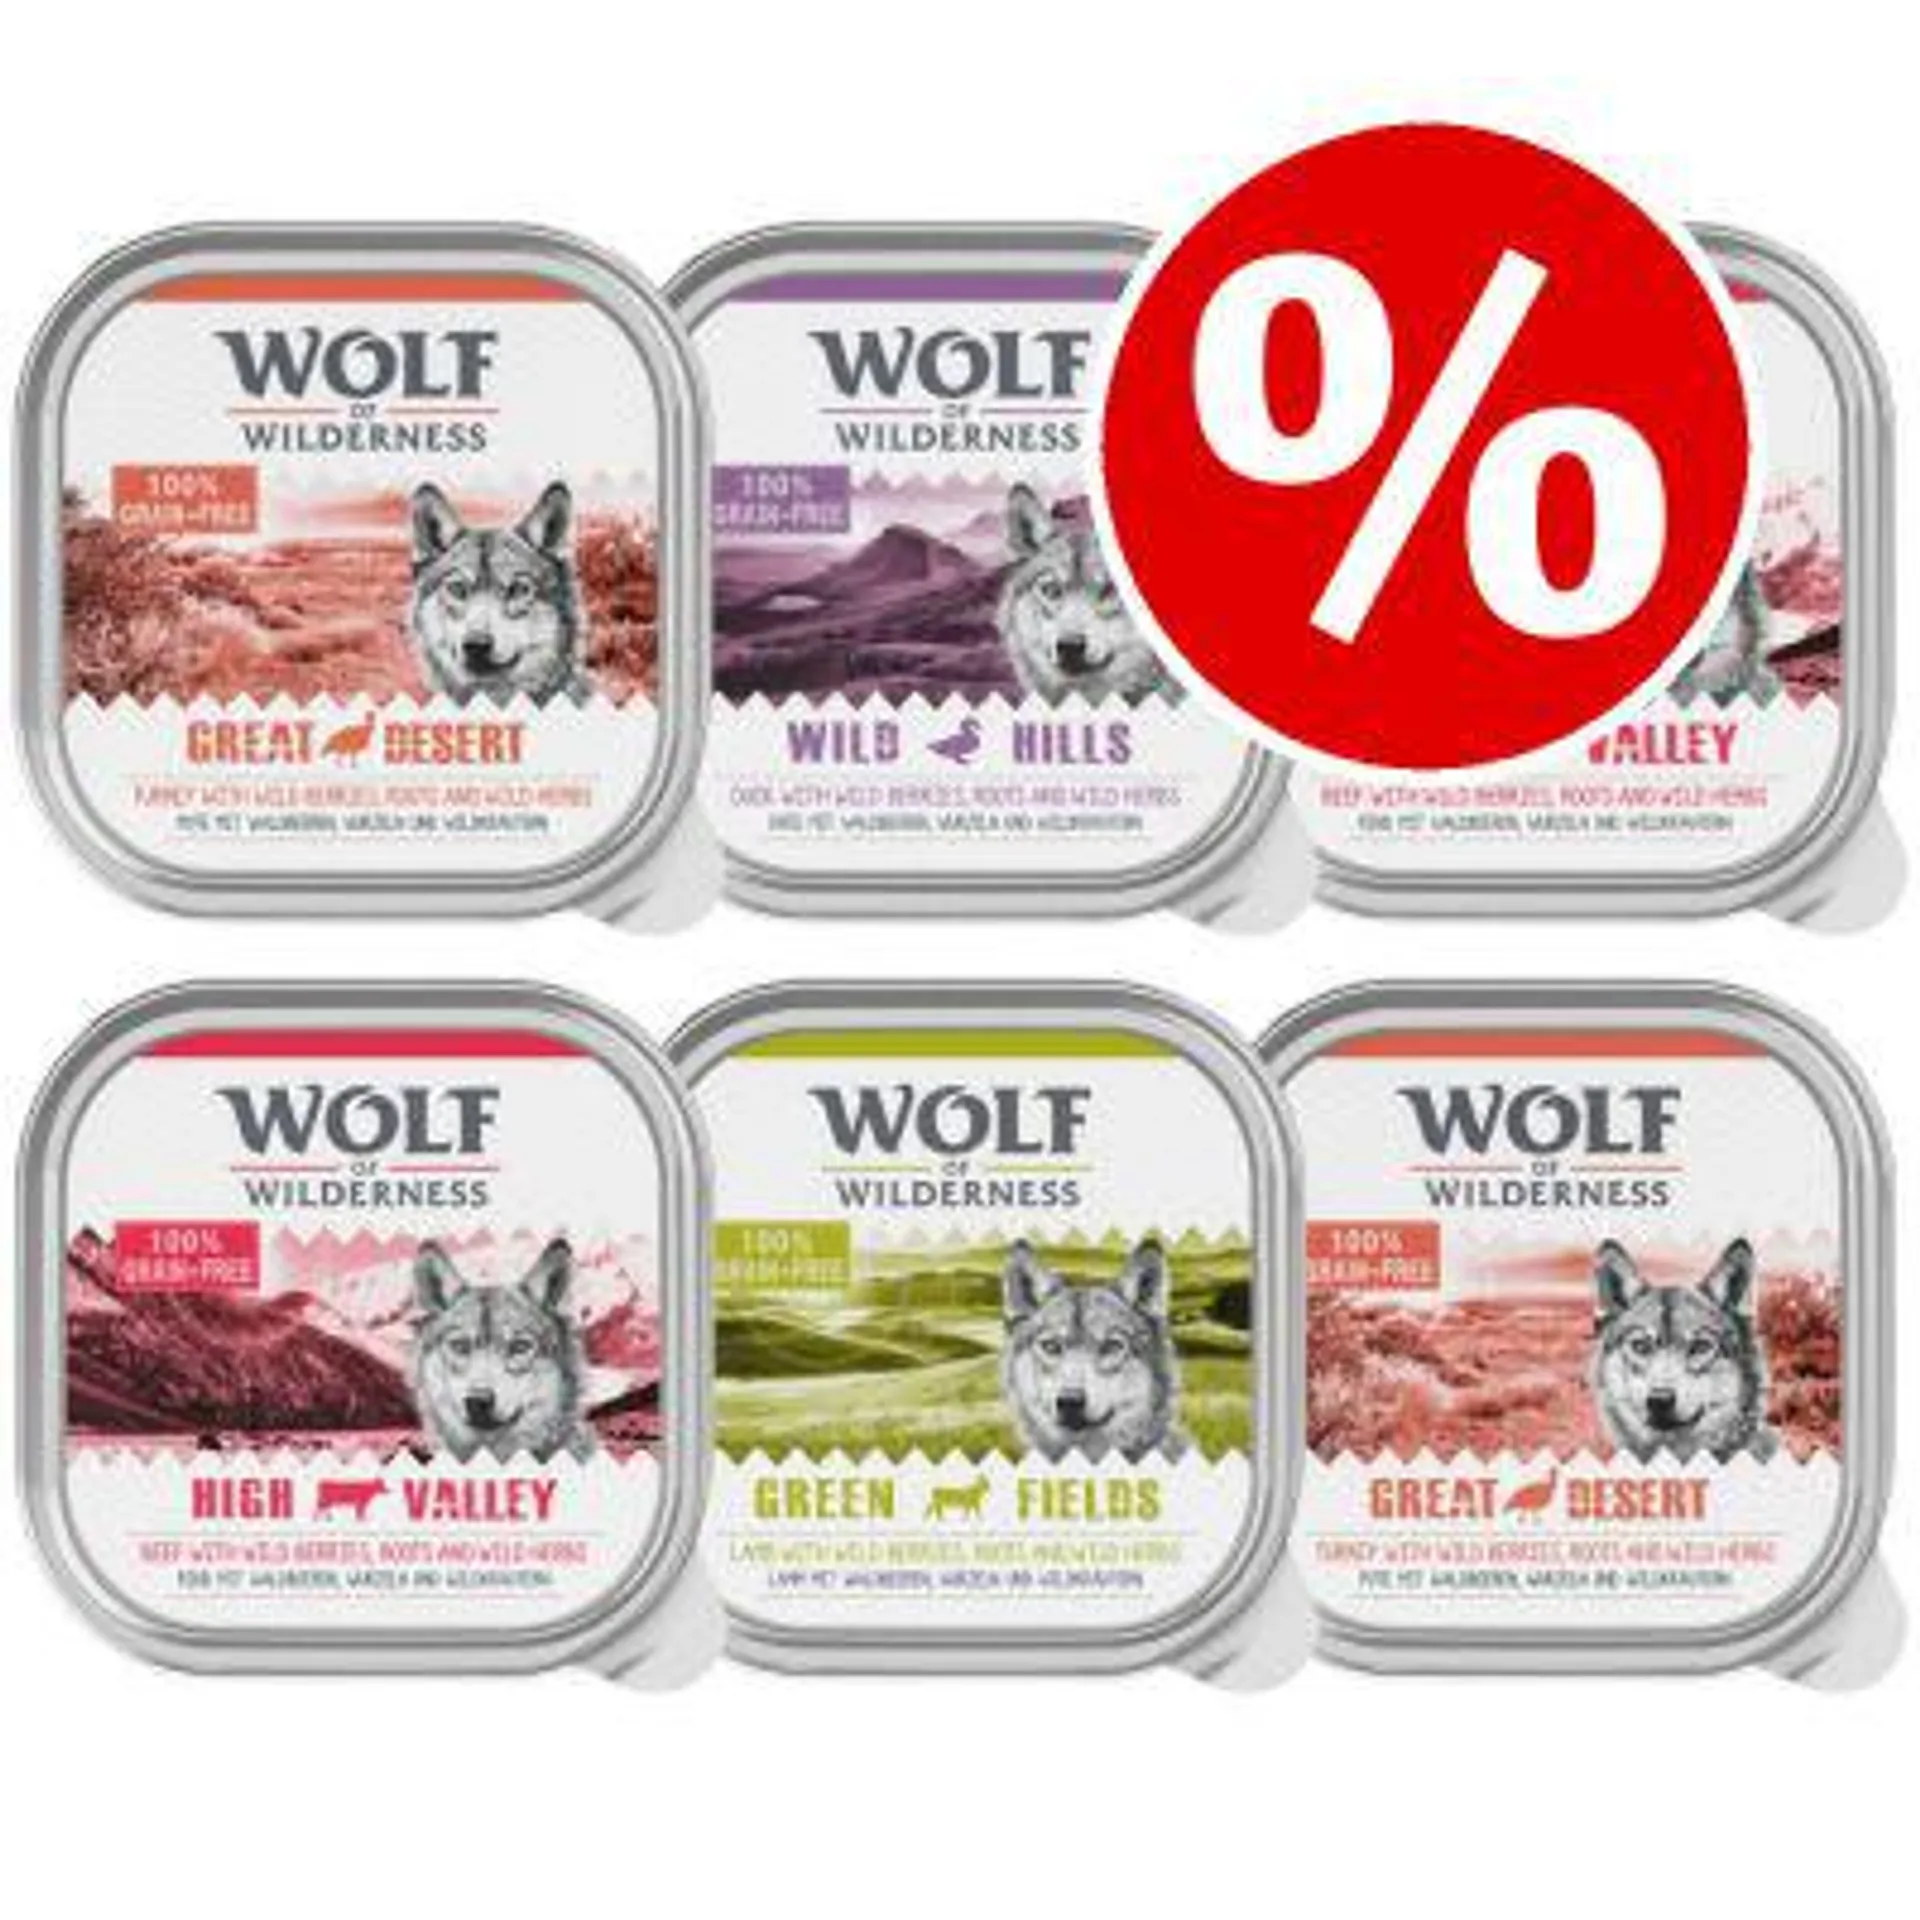 6 x 300g Wolf of Wilderness Trays Mixed Pack Wet Dog Food - Special Price!*